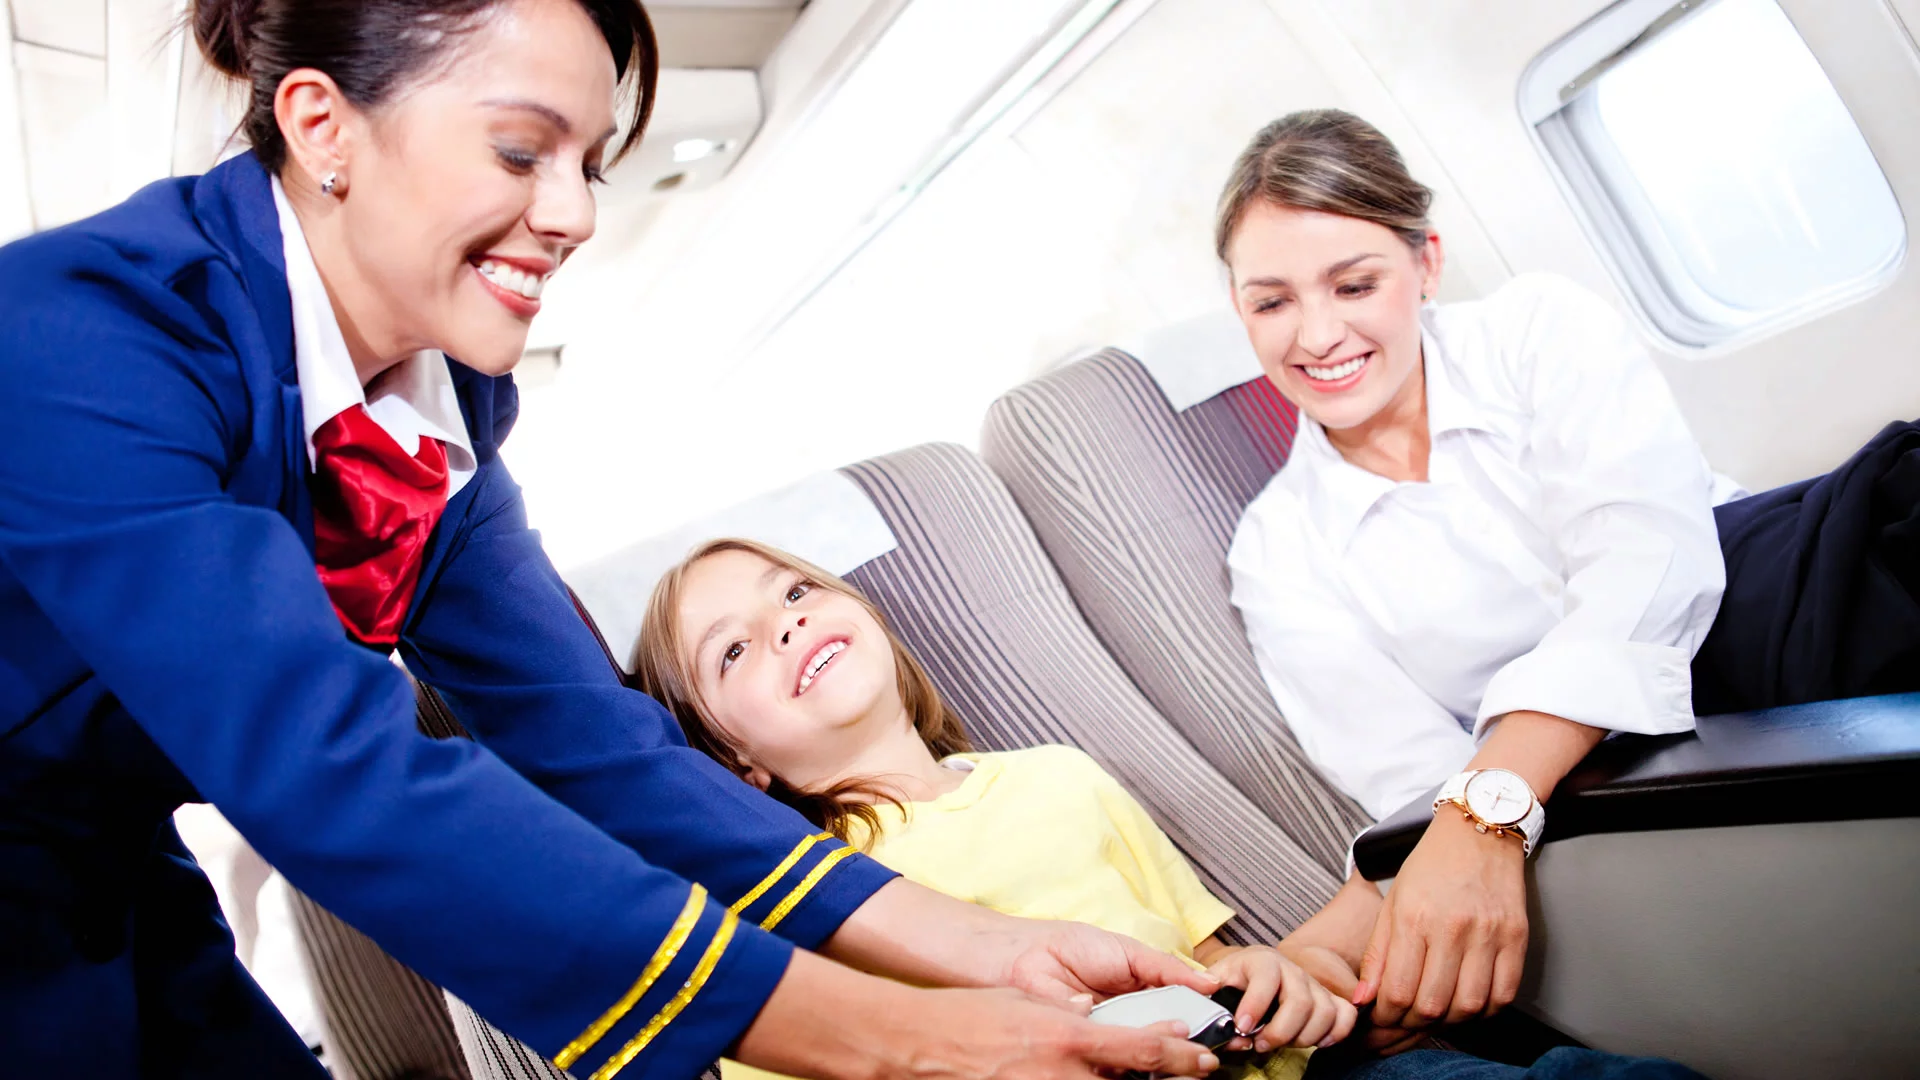 Children and the fear of flying